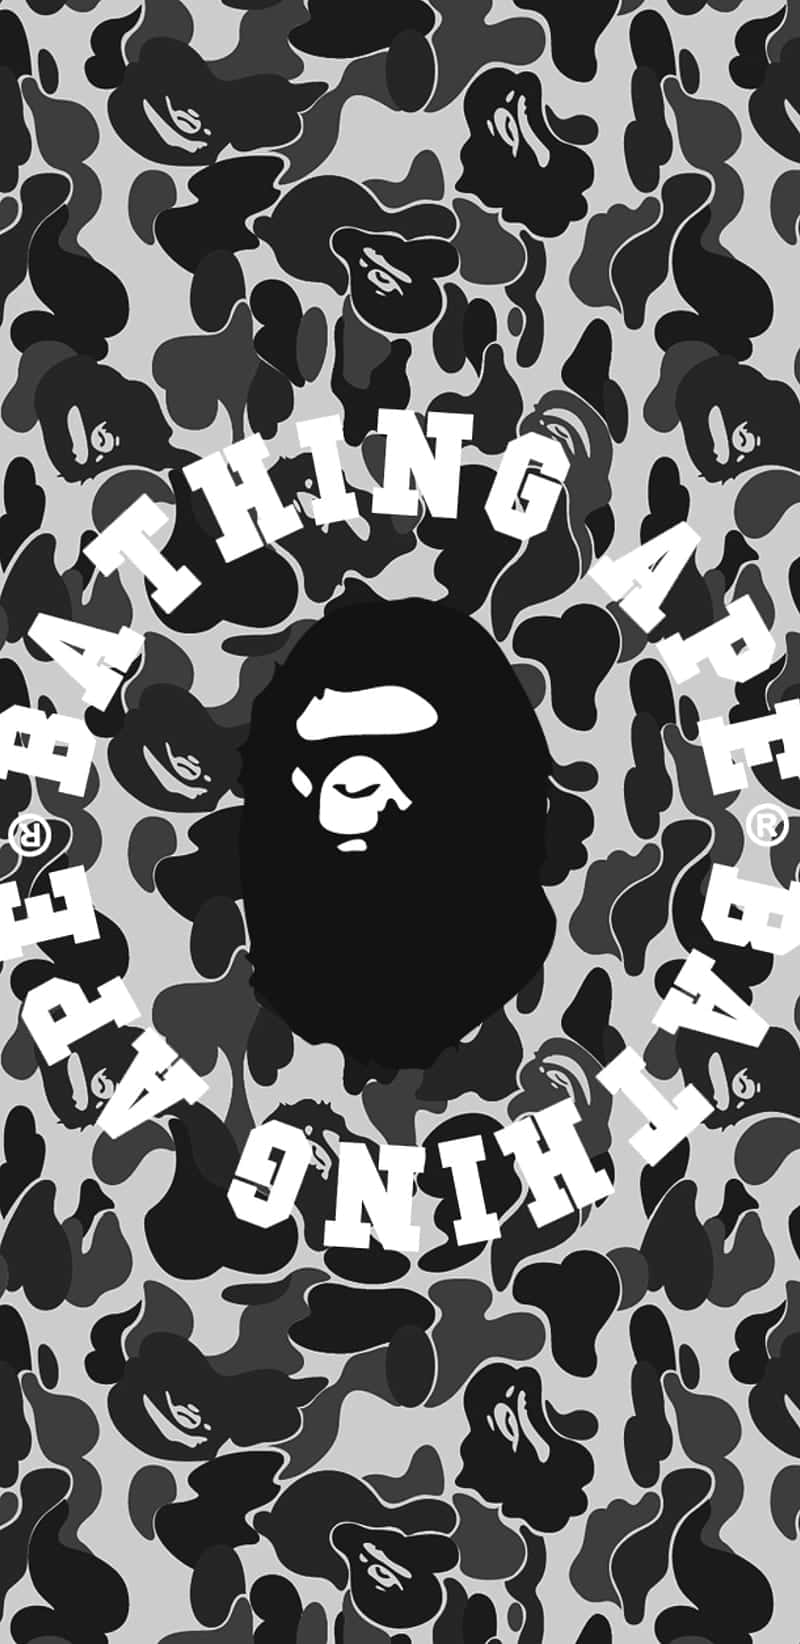 Get ahead of the streetwear curve with the Bape Iphone 6 Wallpaper